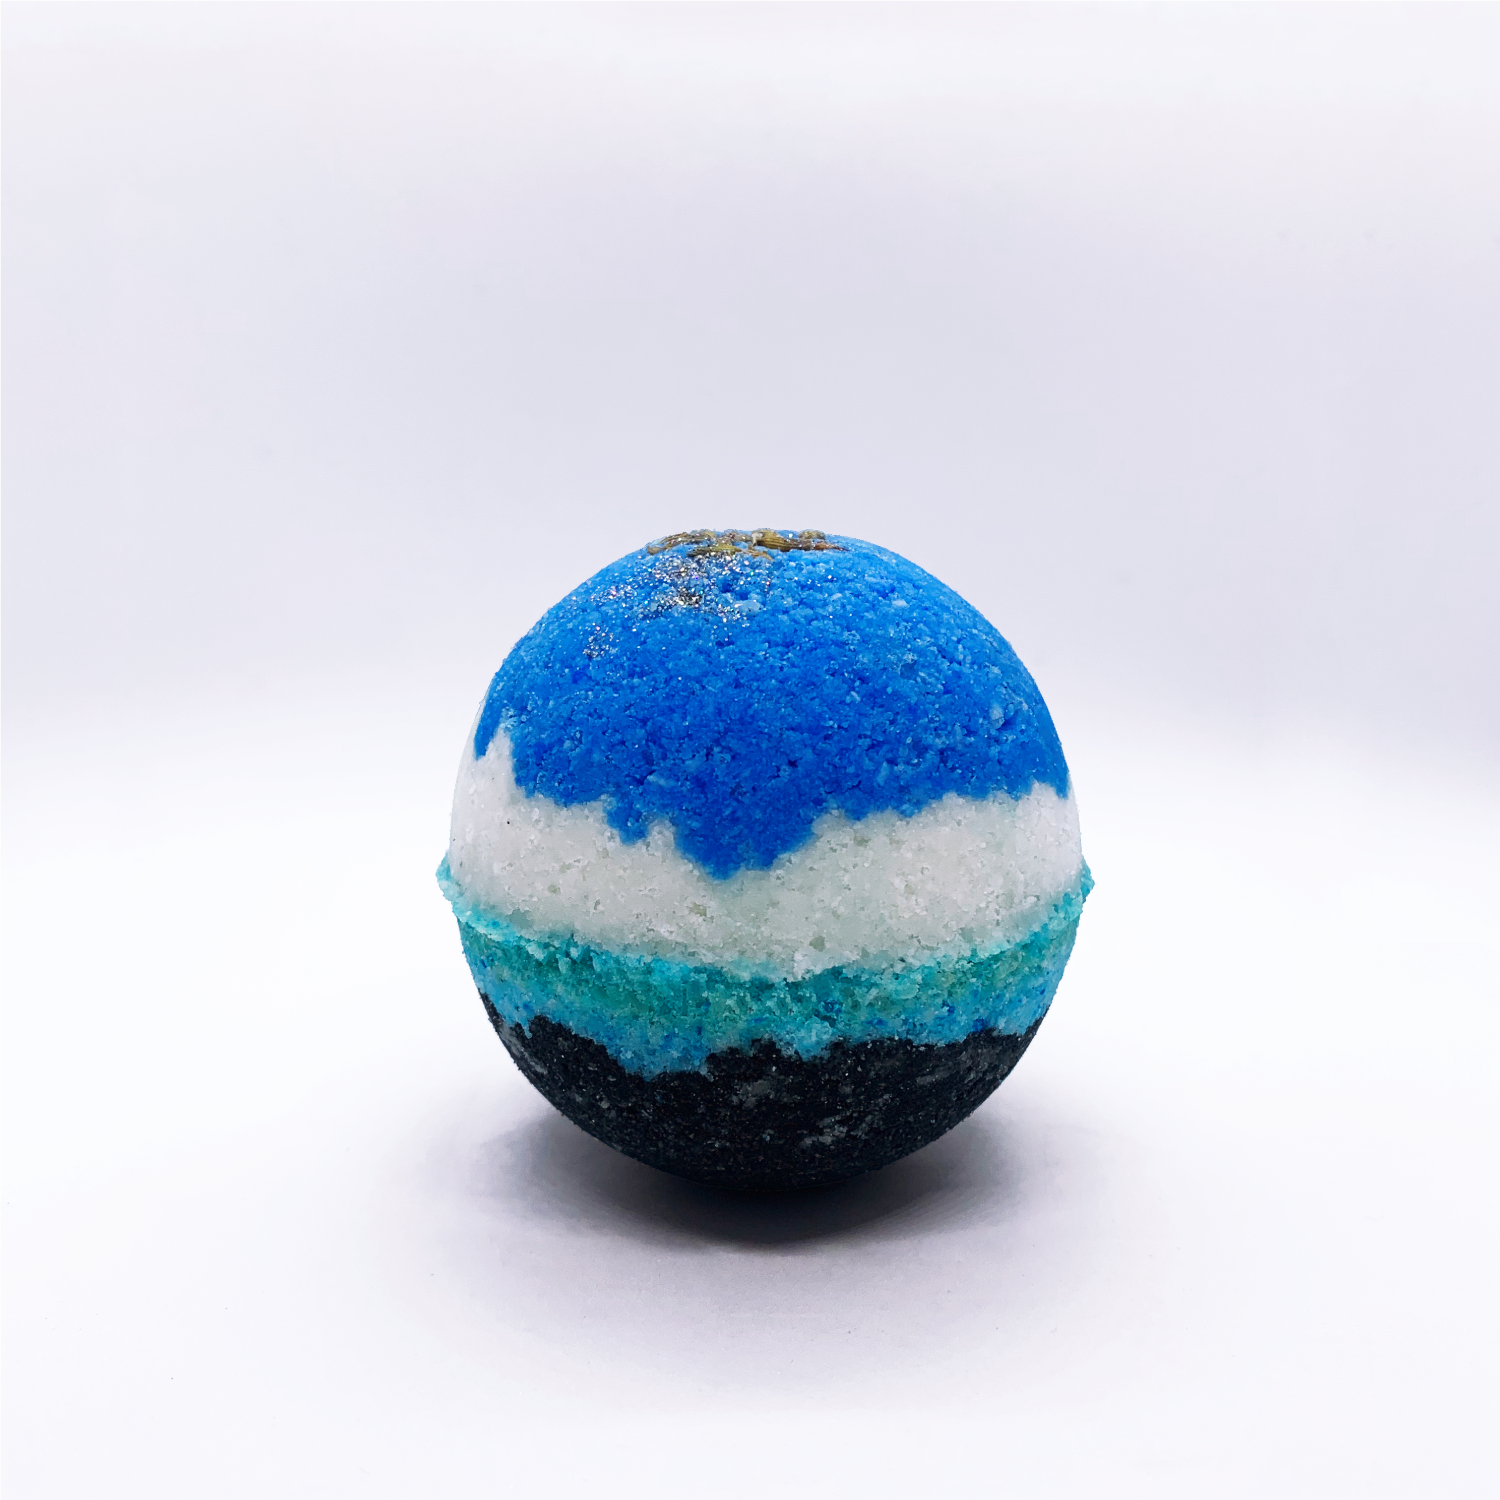 Multilayered Epsom salt and baking soda based fizzy bath bomb in blue, white, turquoise and black and lavender buds on top